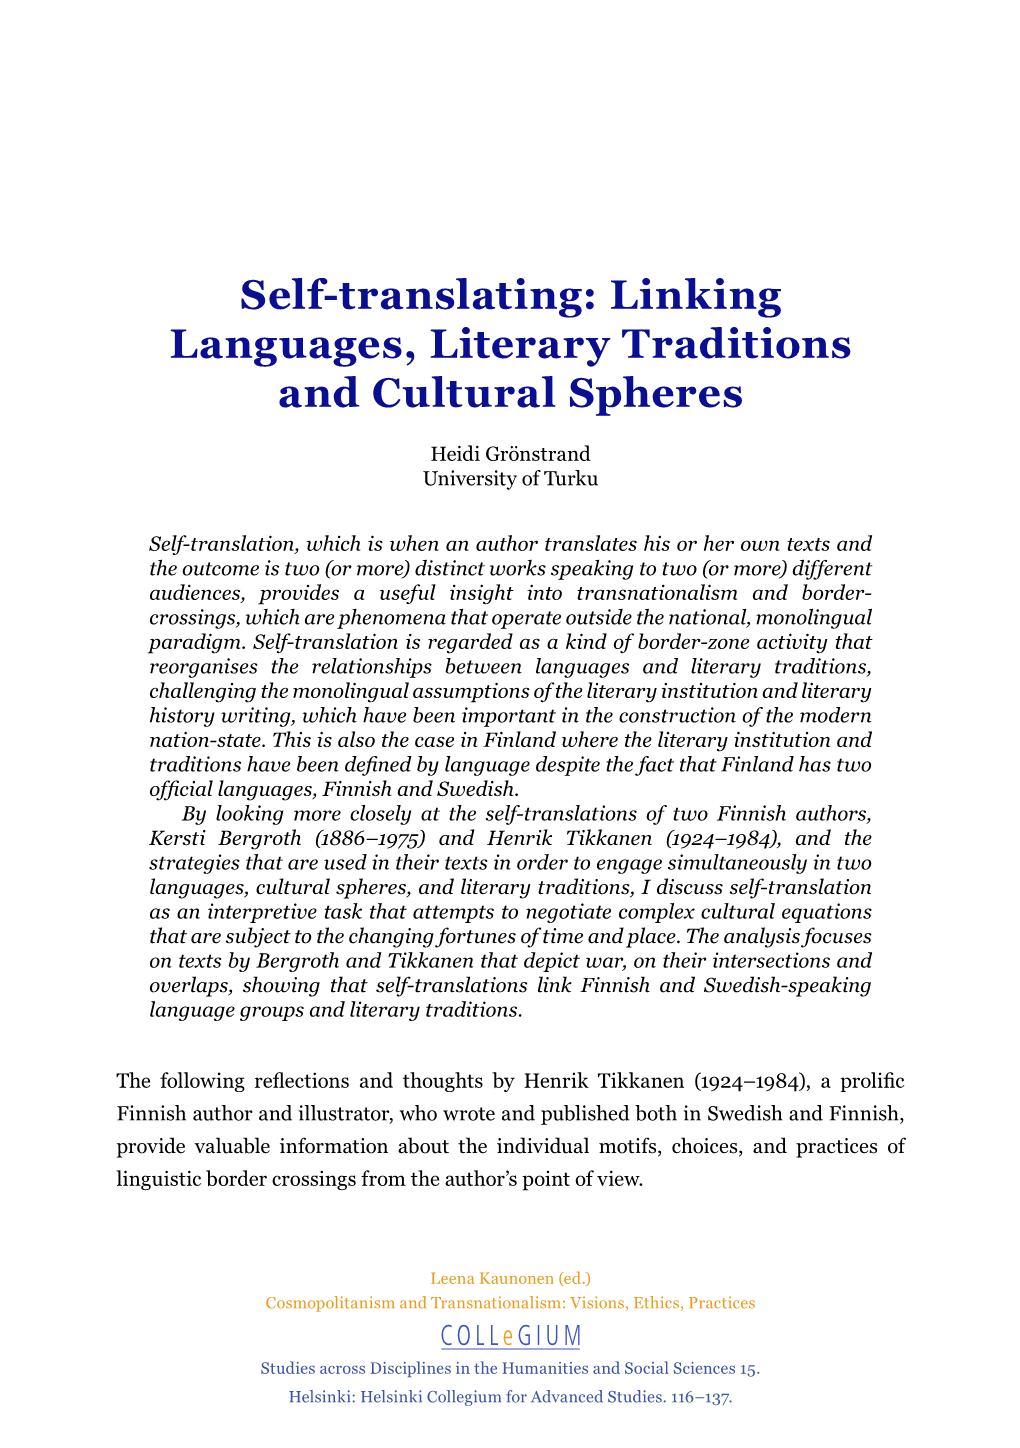 Self-Translating: Linking Languages, Literary Traditions and Cultural Spheres